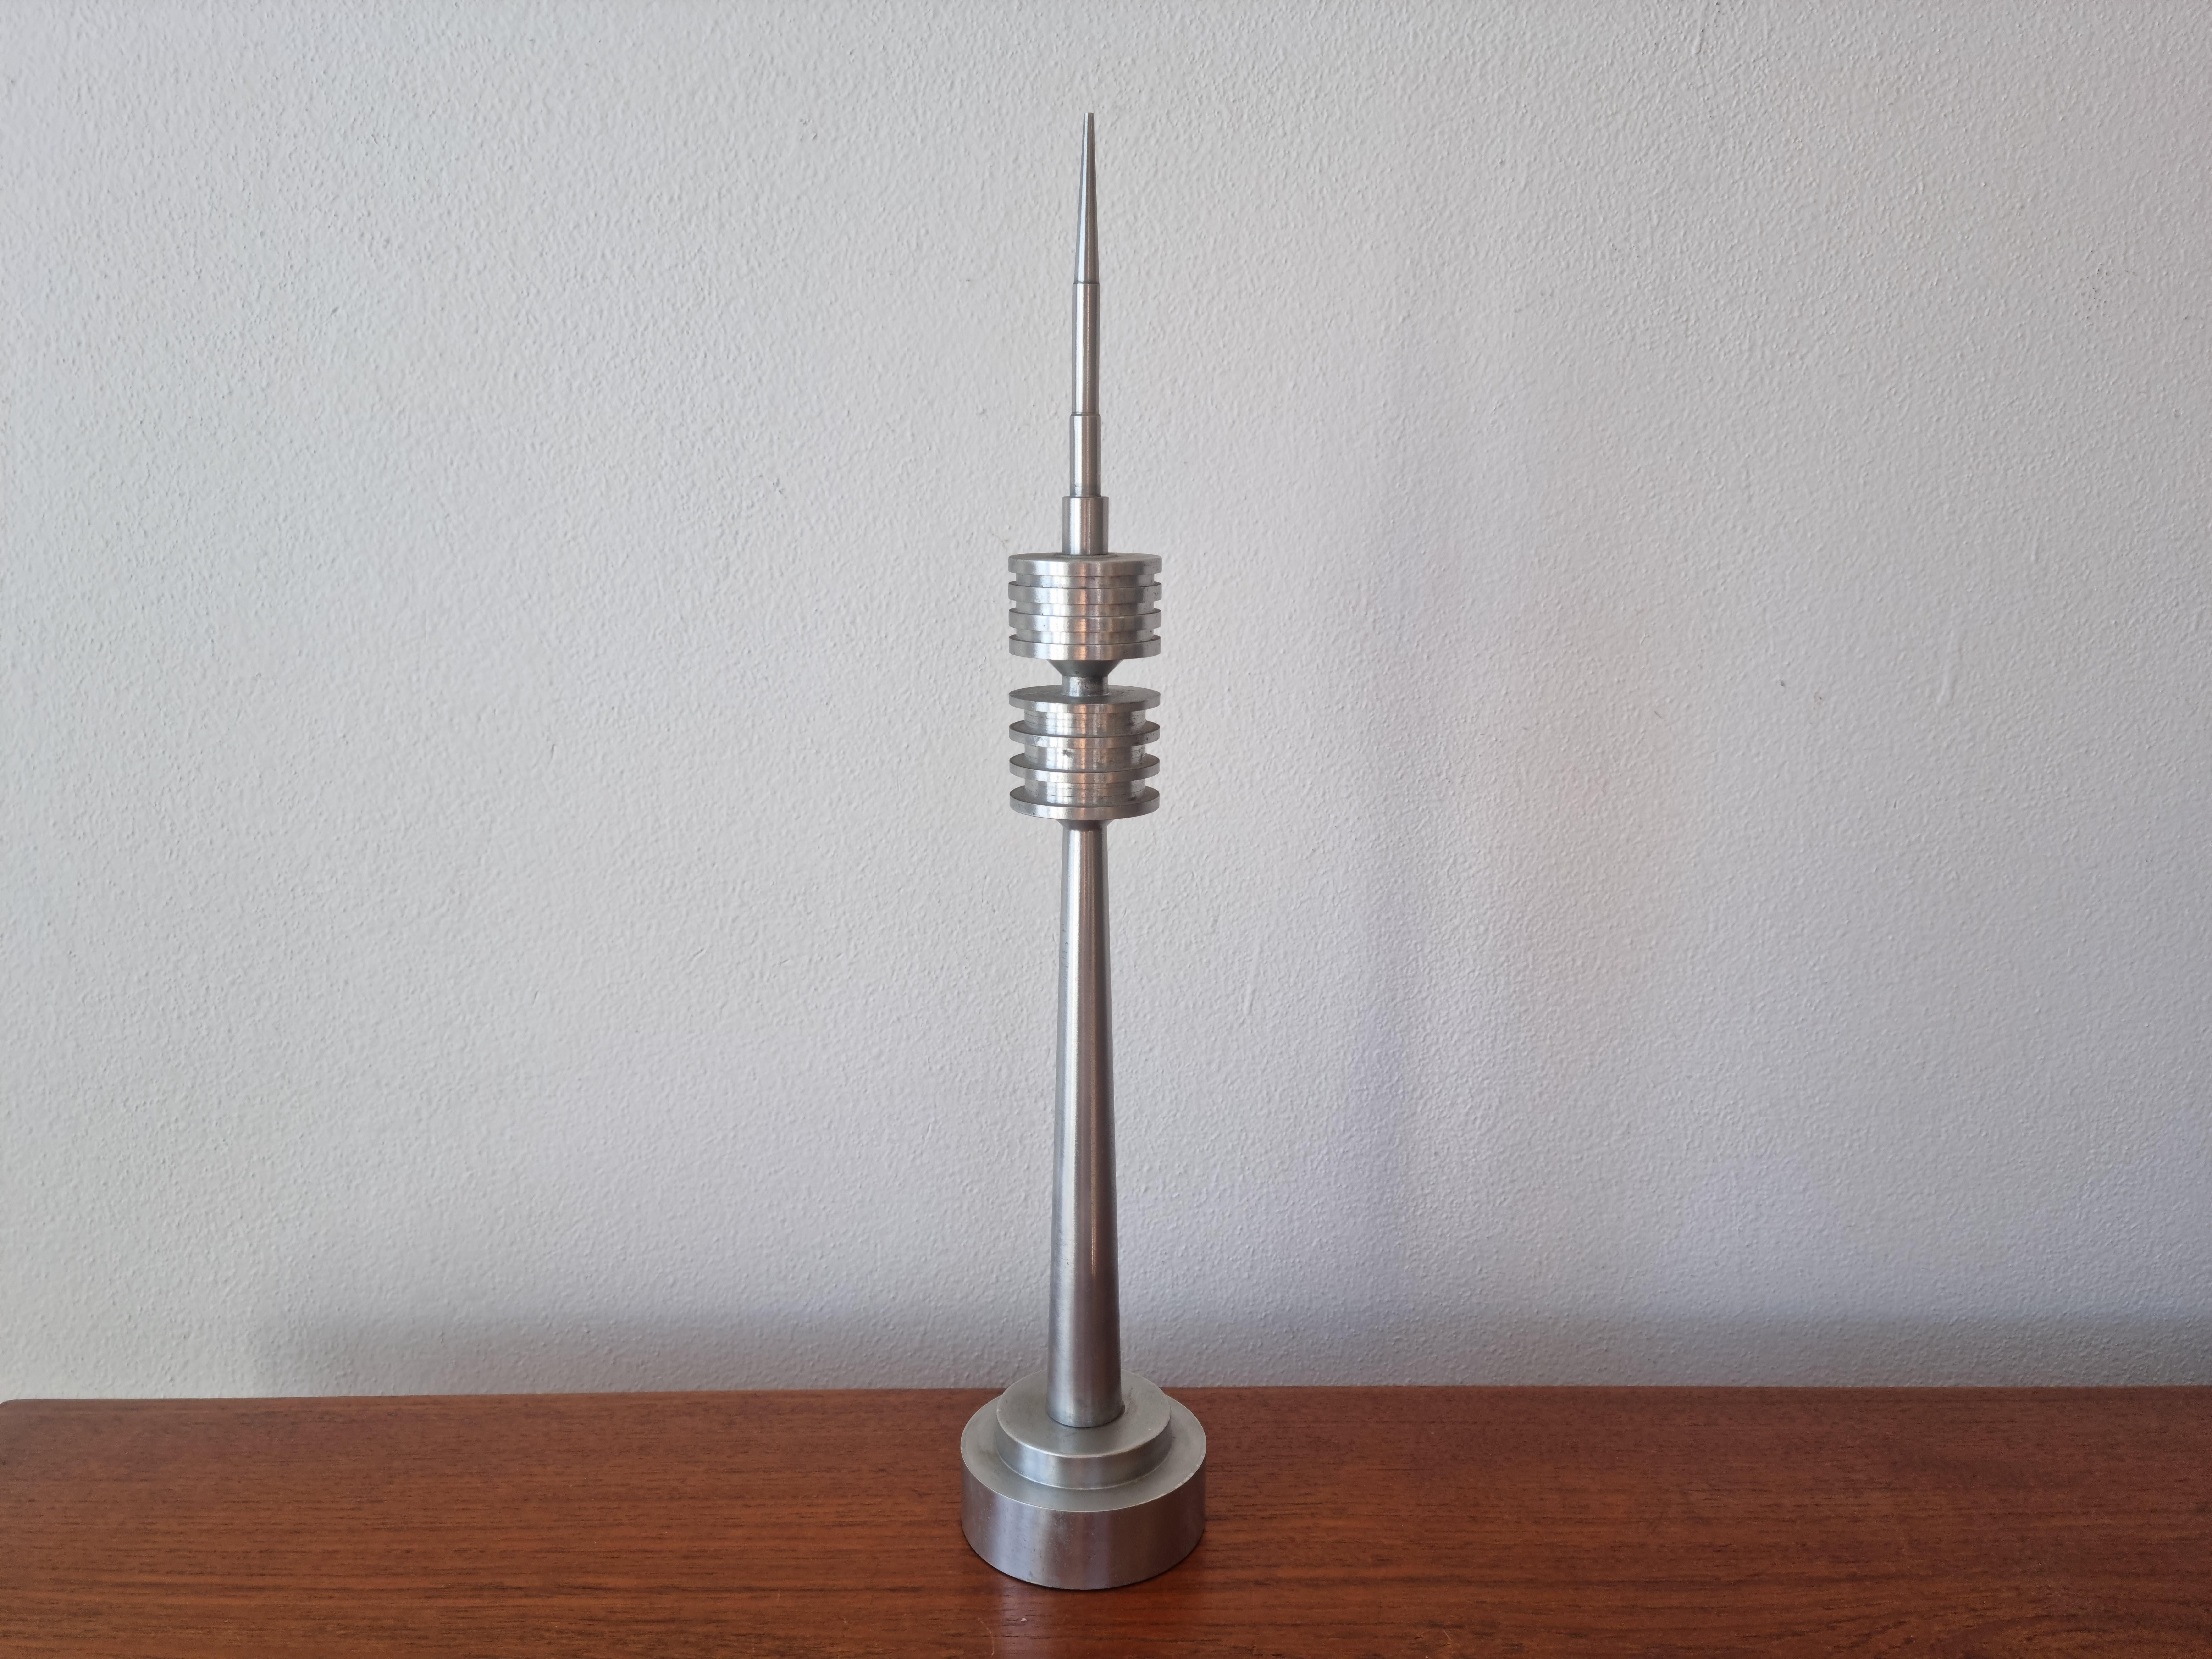 Late 20th Century Large Midcentury Aluminium Model of Munich TV Television Olympic Tower, 1970s